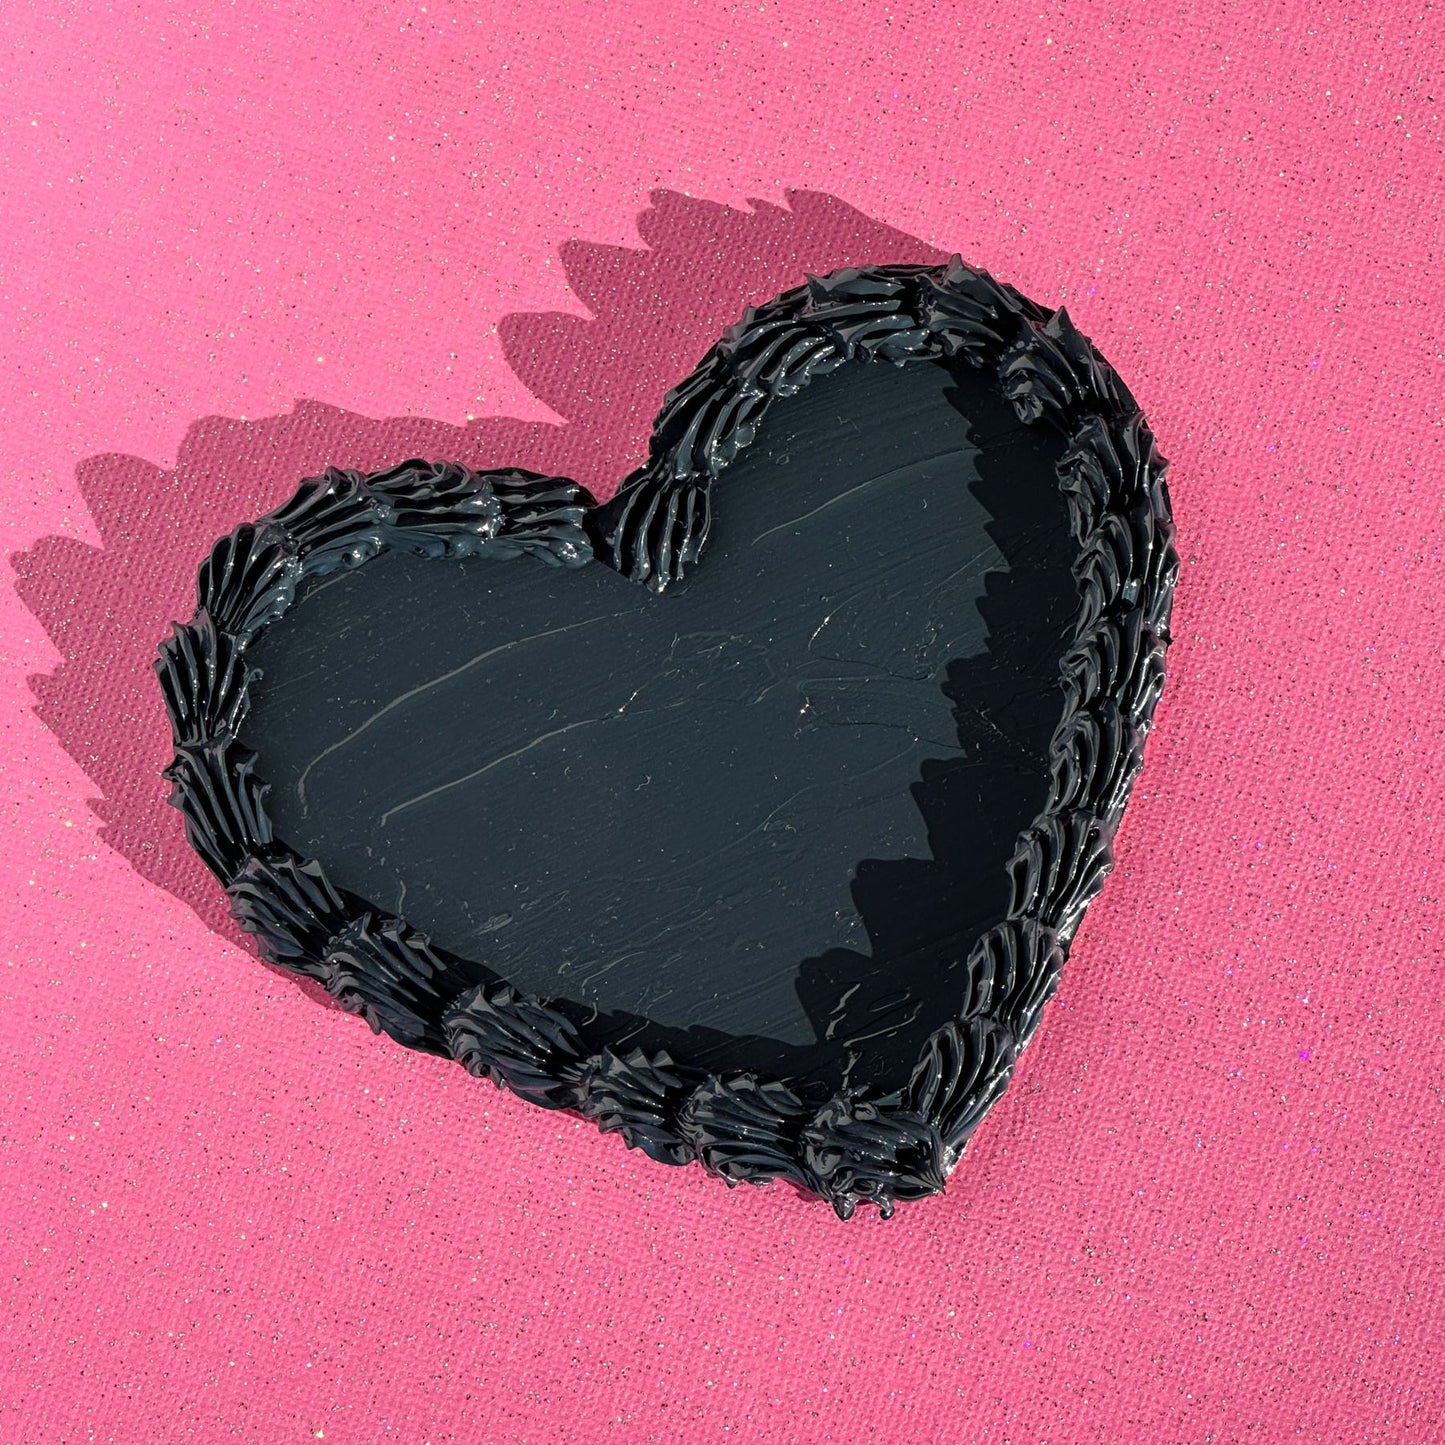 3D Painted Cookie - Heart With Light Black "Frosting"